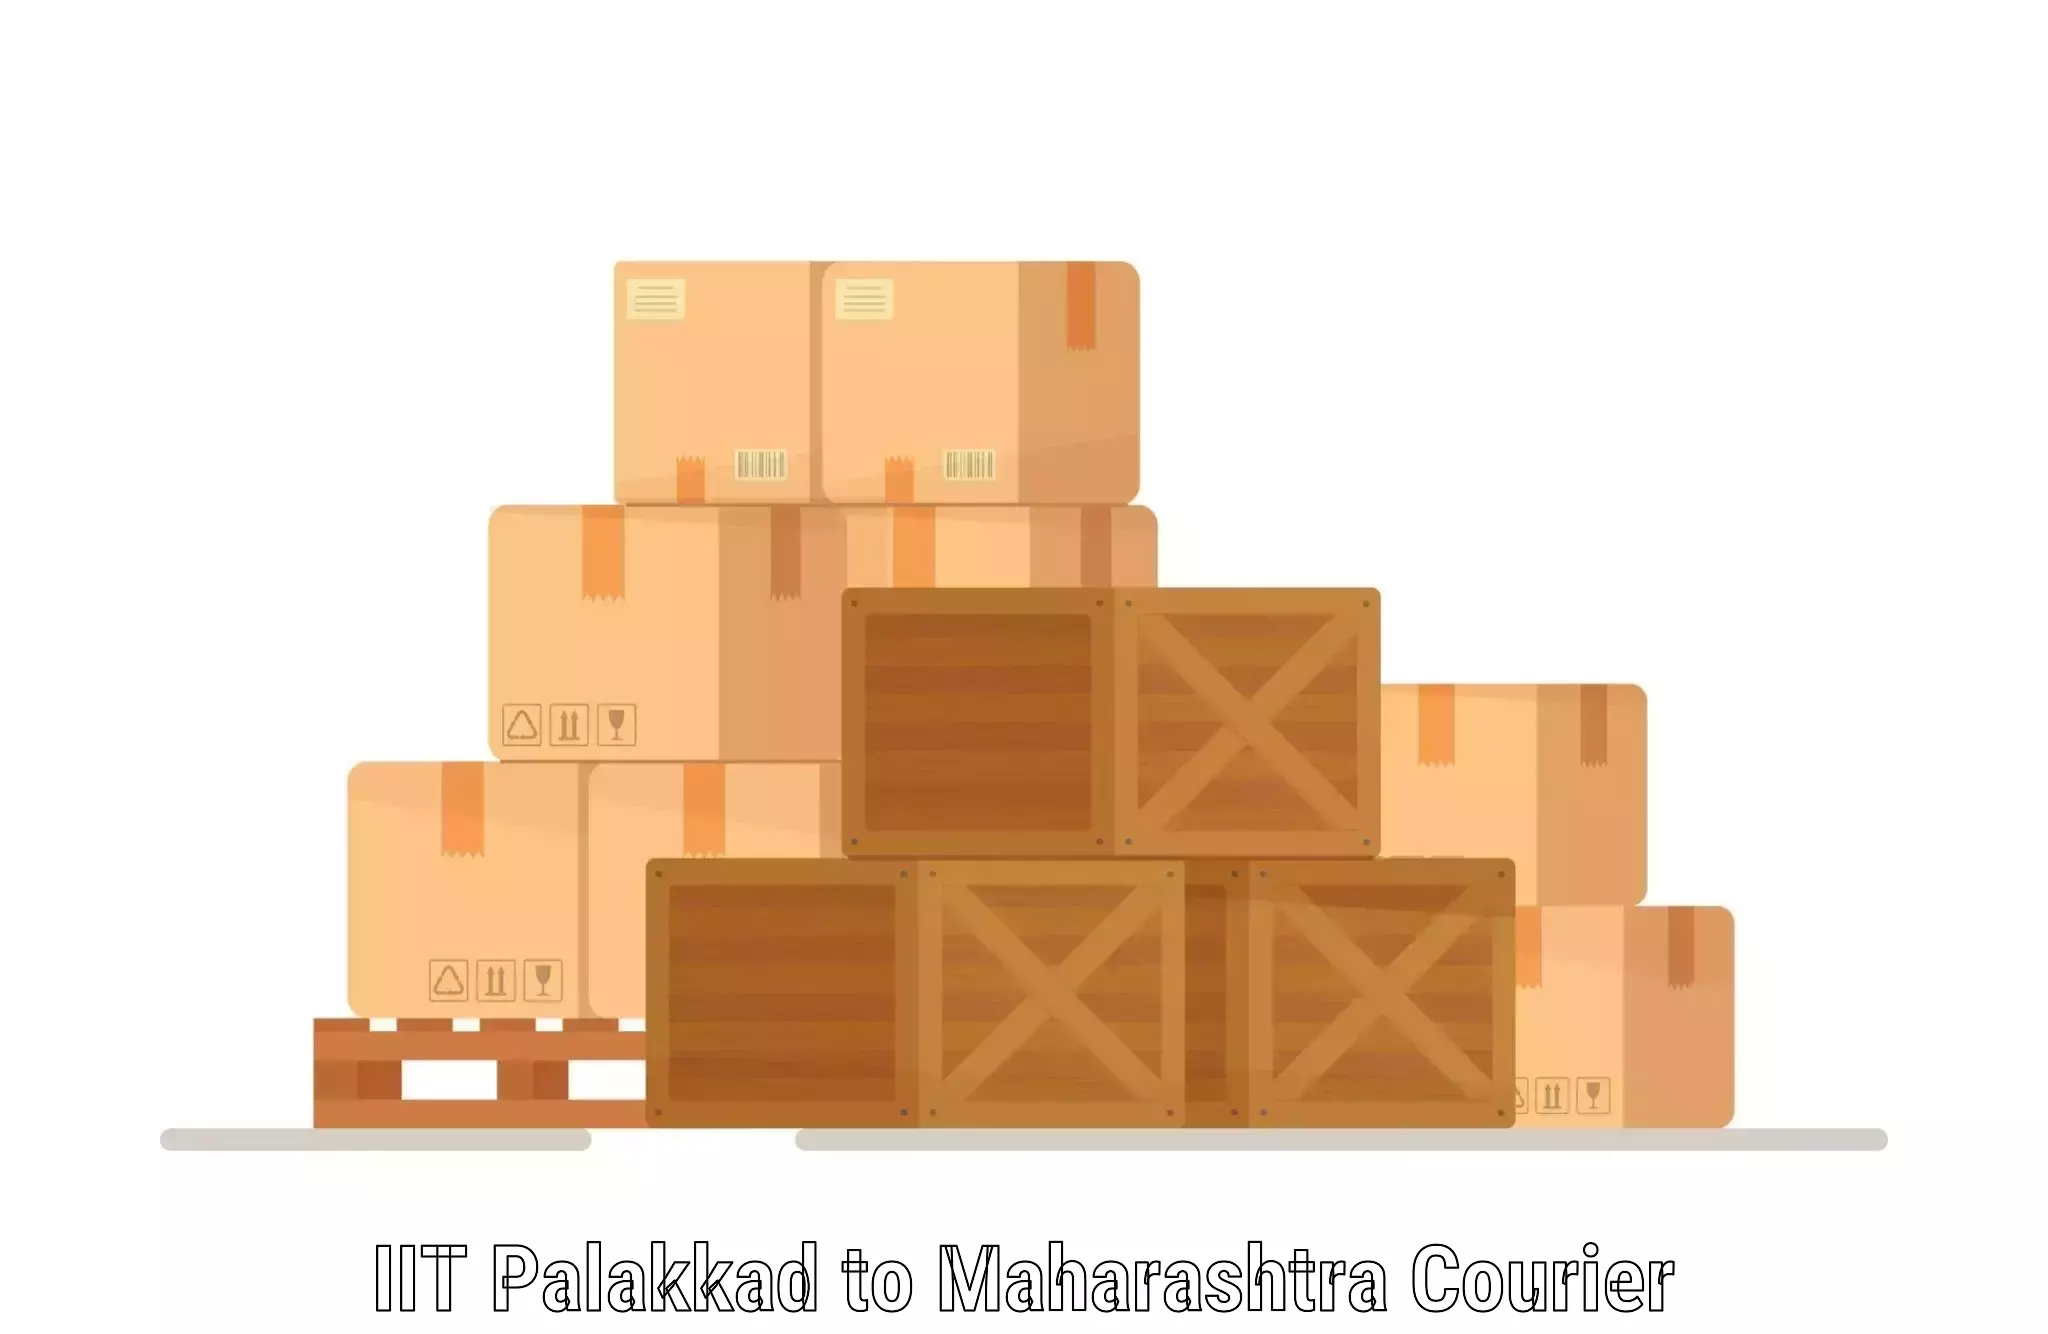 Same-day delivery options IIT Palakkad to Mukhed